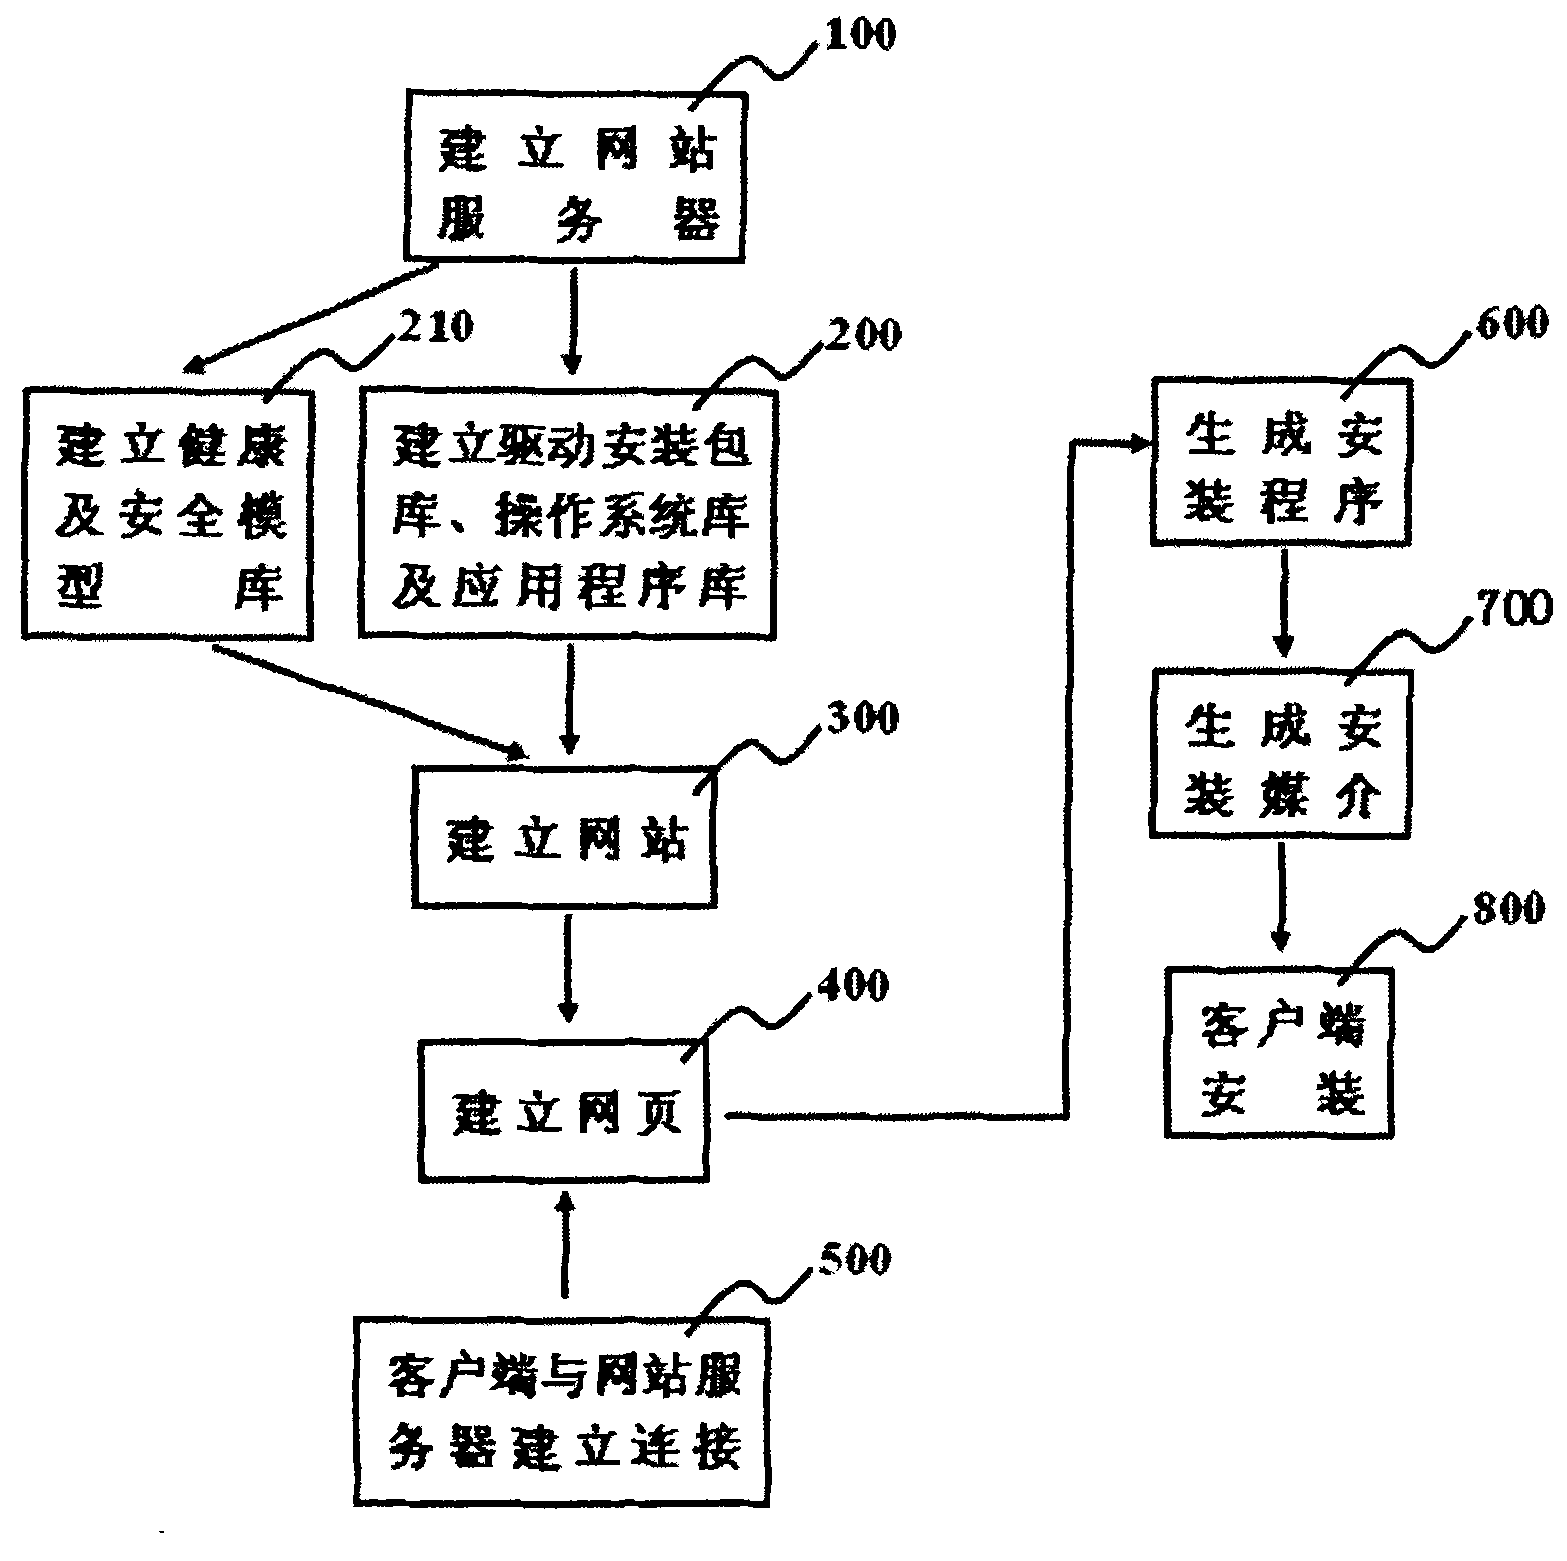 Method and system for customizing installation of computer software